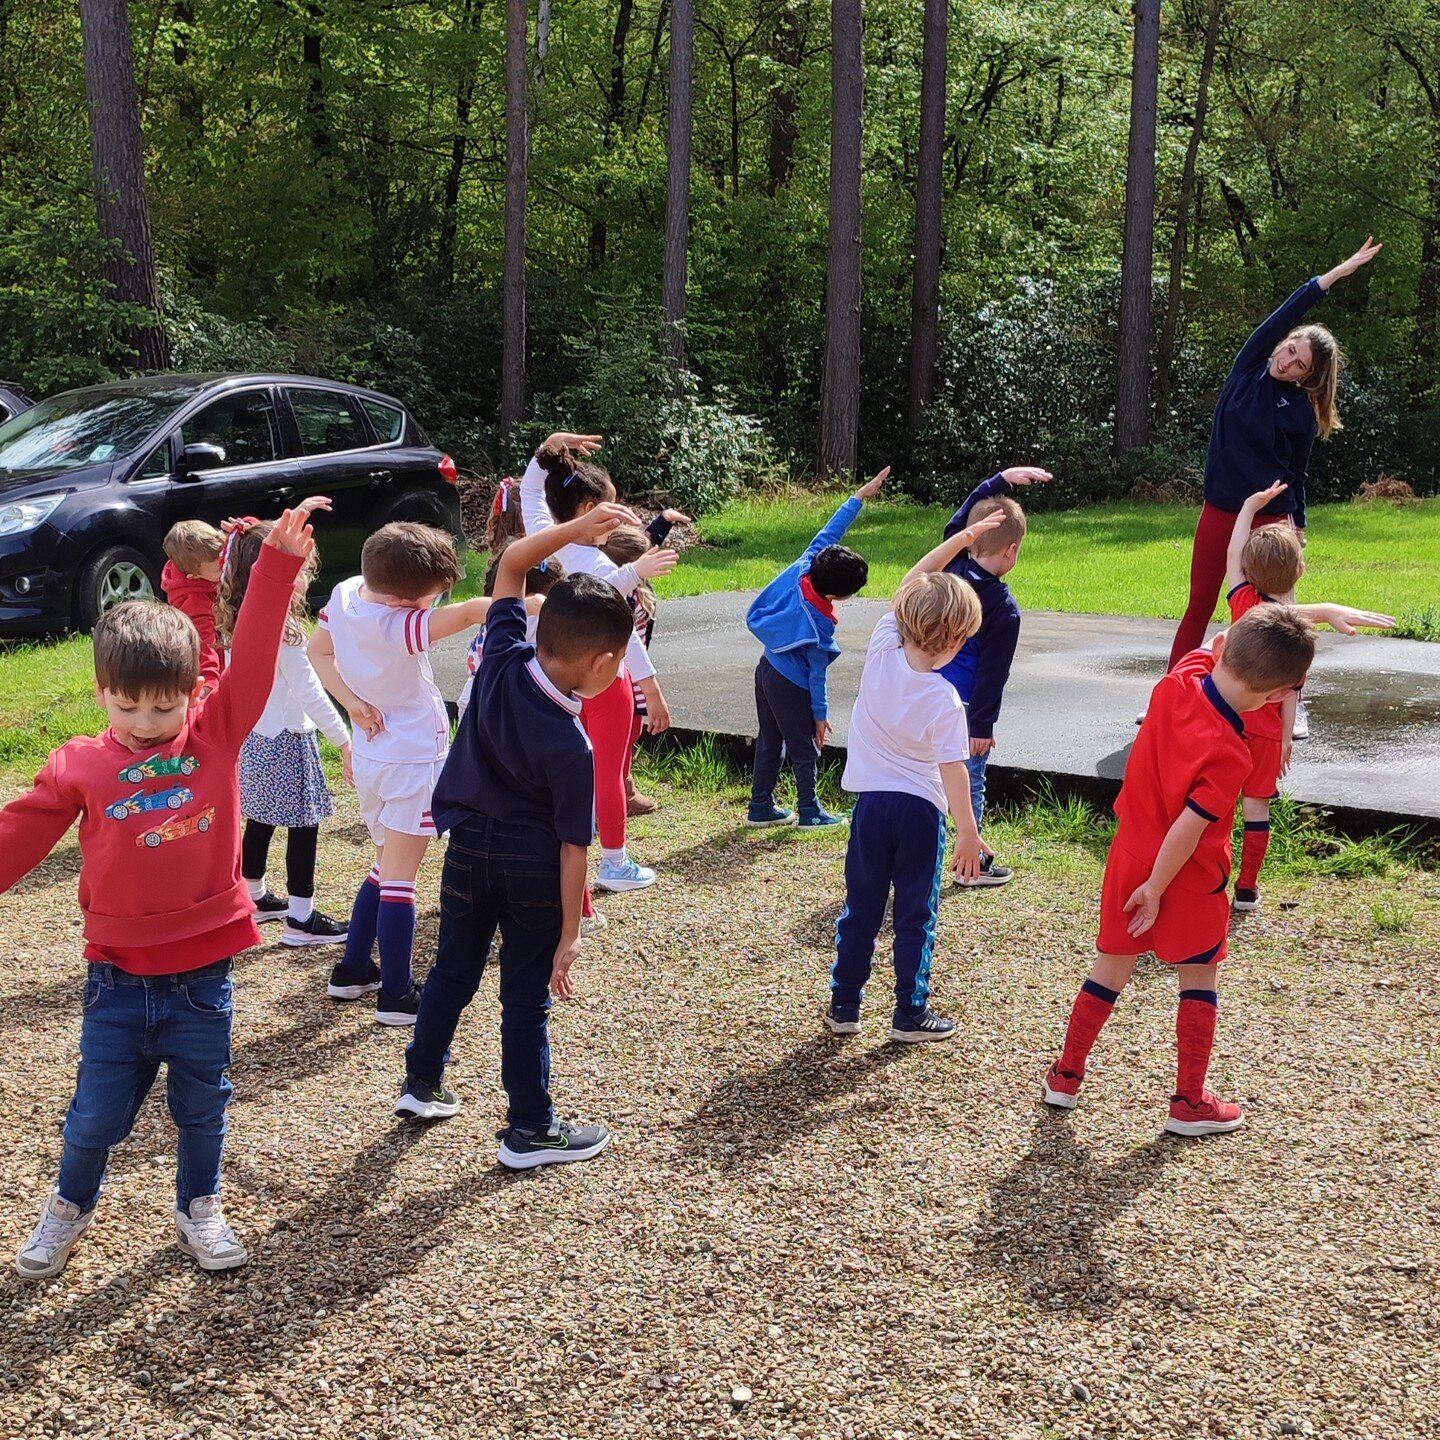 We've had a brilliant morning of activities; dancing, jousting, woodland care and the St Neot's favourite wide game

#itsastneotsthing #kingscoronation #coronationactivities